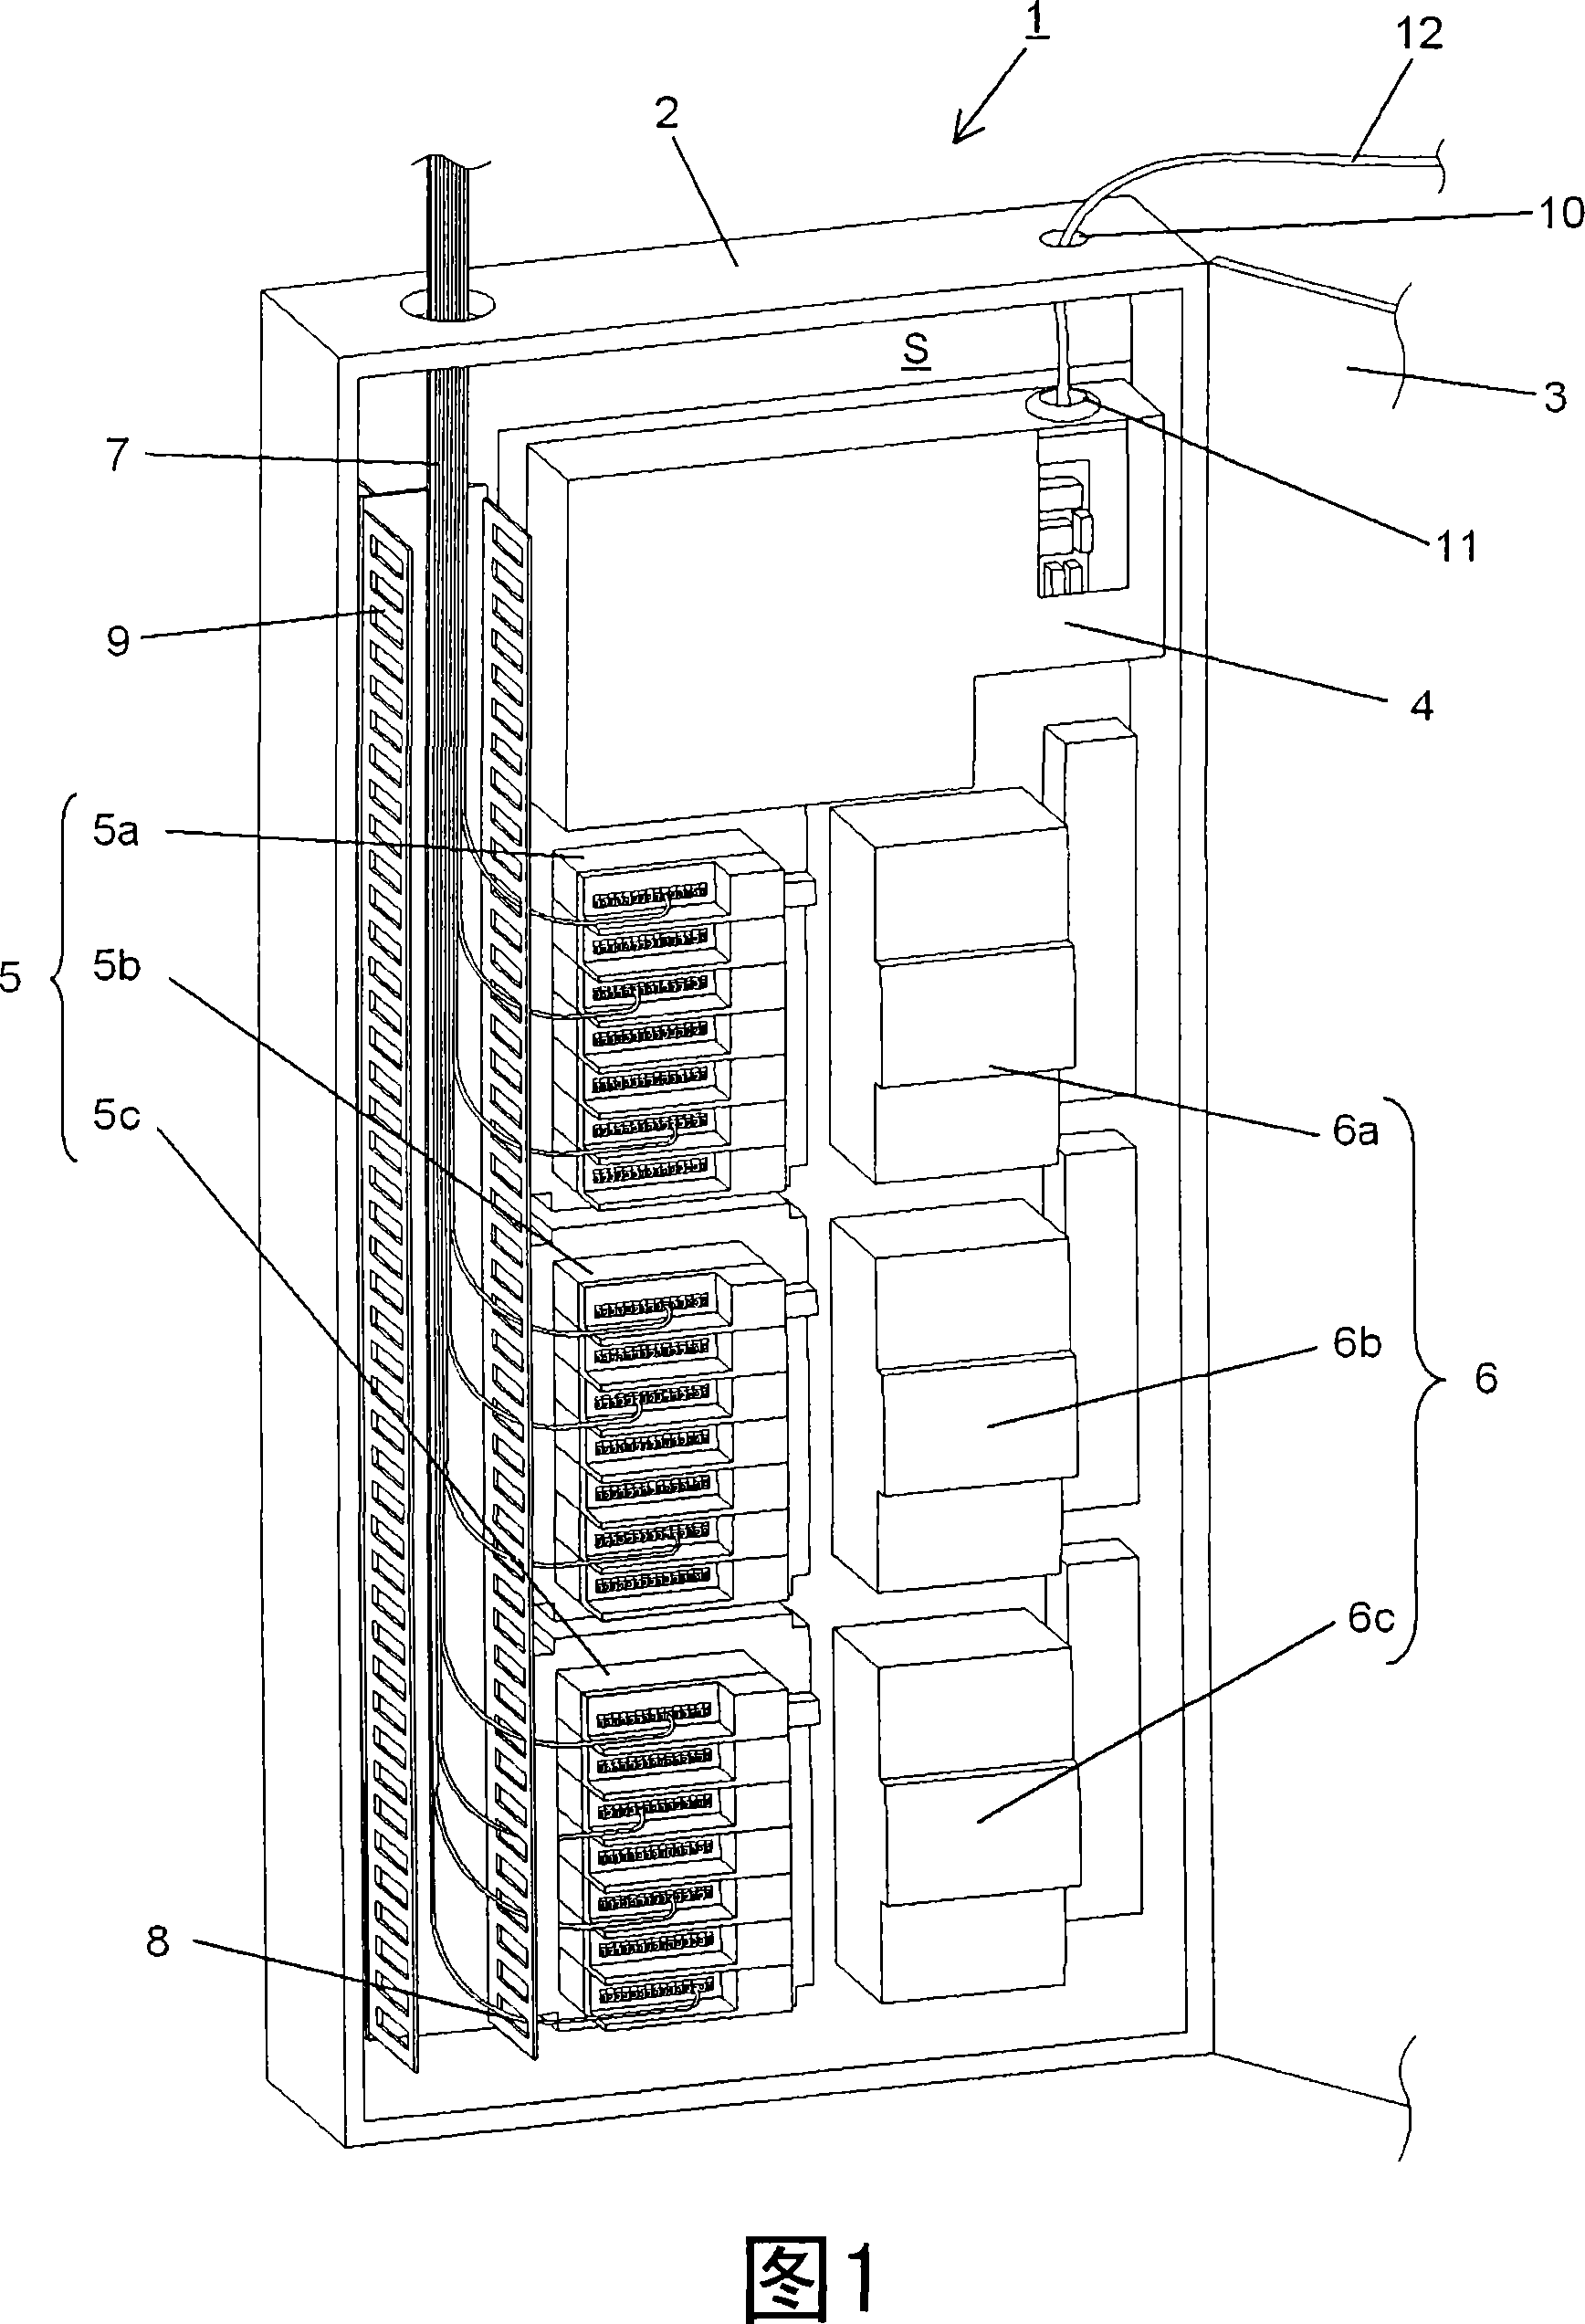 Control disc device